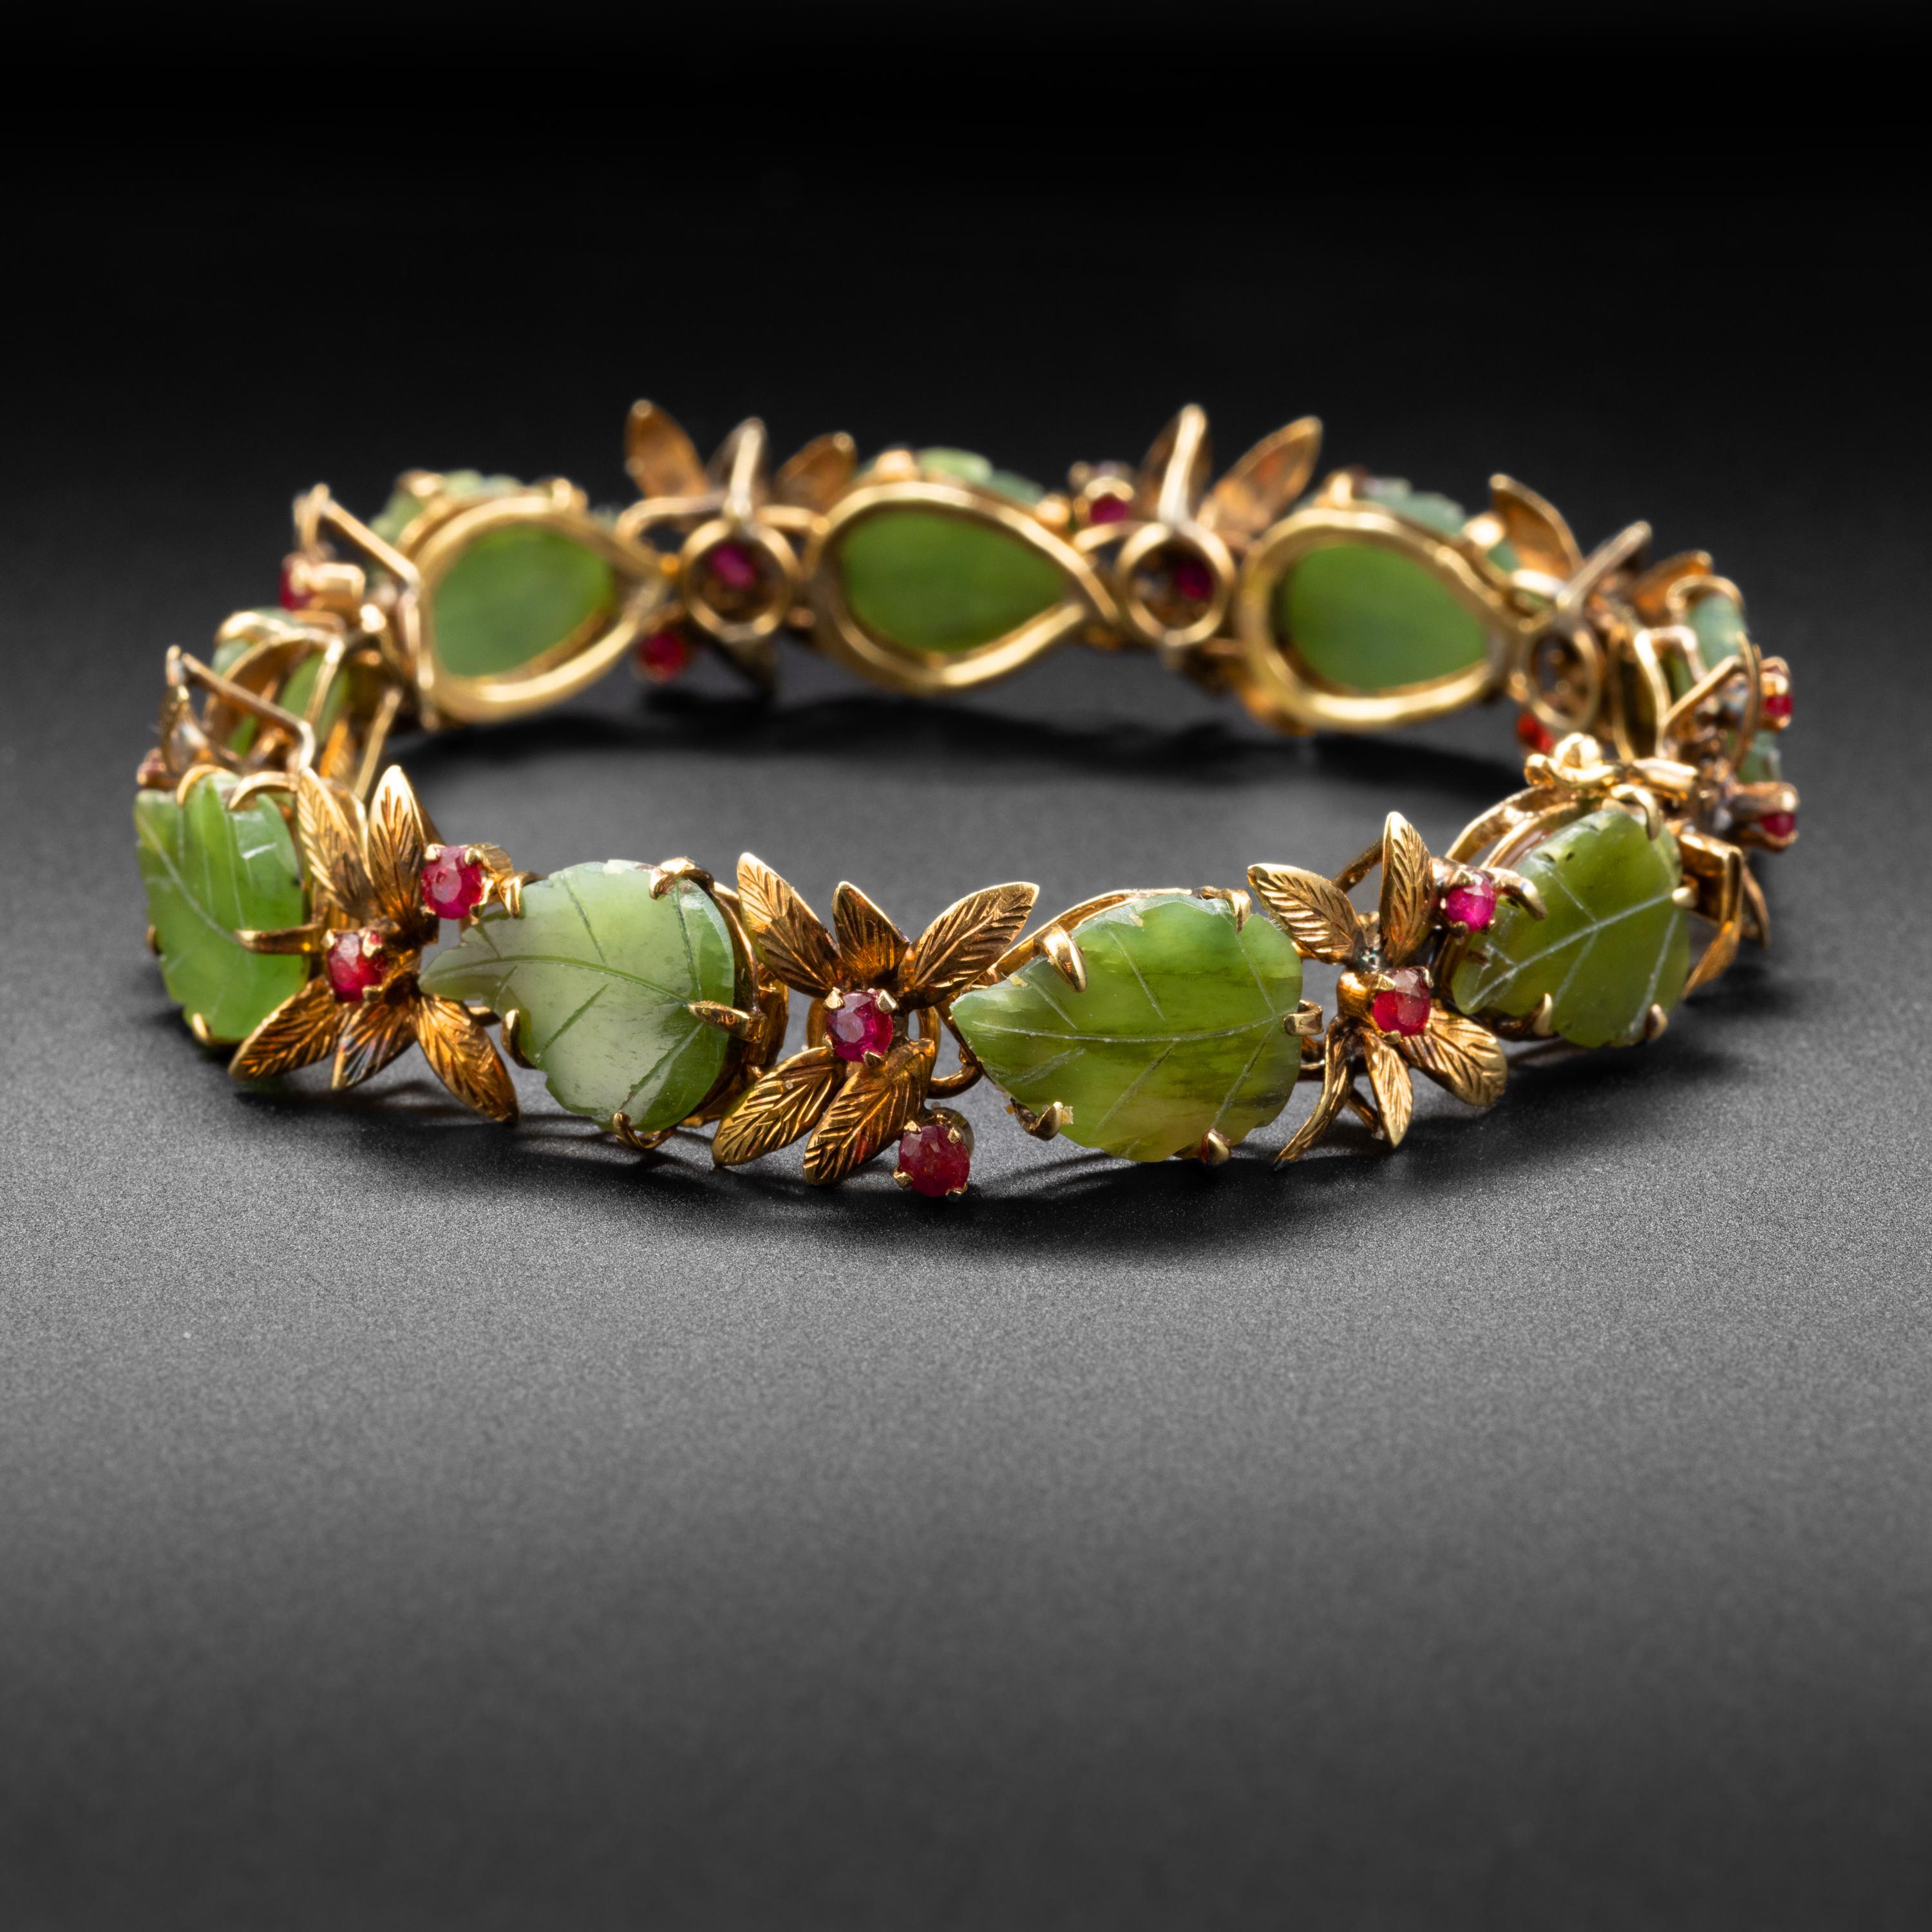 This one-of-a-kind bracelet from the late 1940s- early 1950s features leaves of translucent green natural and untreated nephrite jade nestled between long, slender leaves rendered in buttery 18K gold and set with vivid red natural ruby 